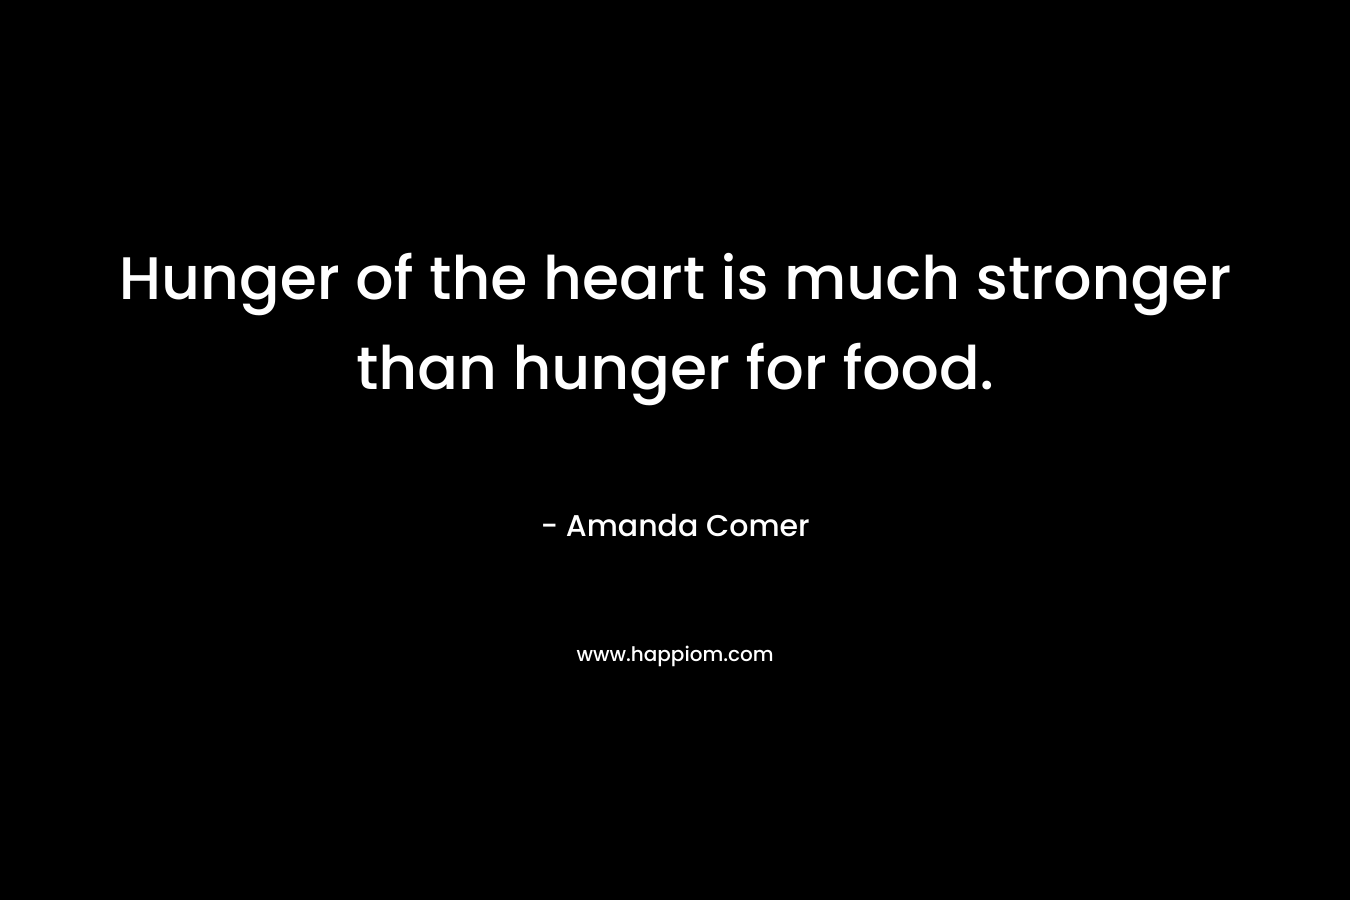 Hunger of the heart is much stronger than hunger for food.